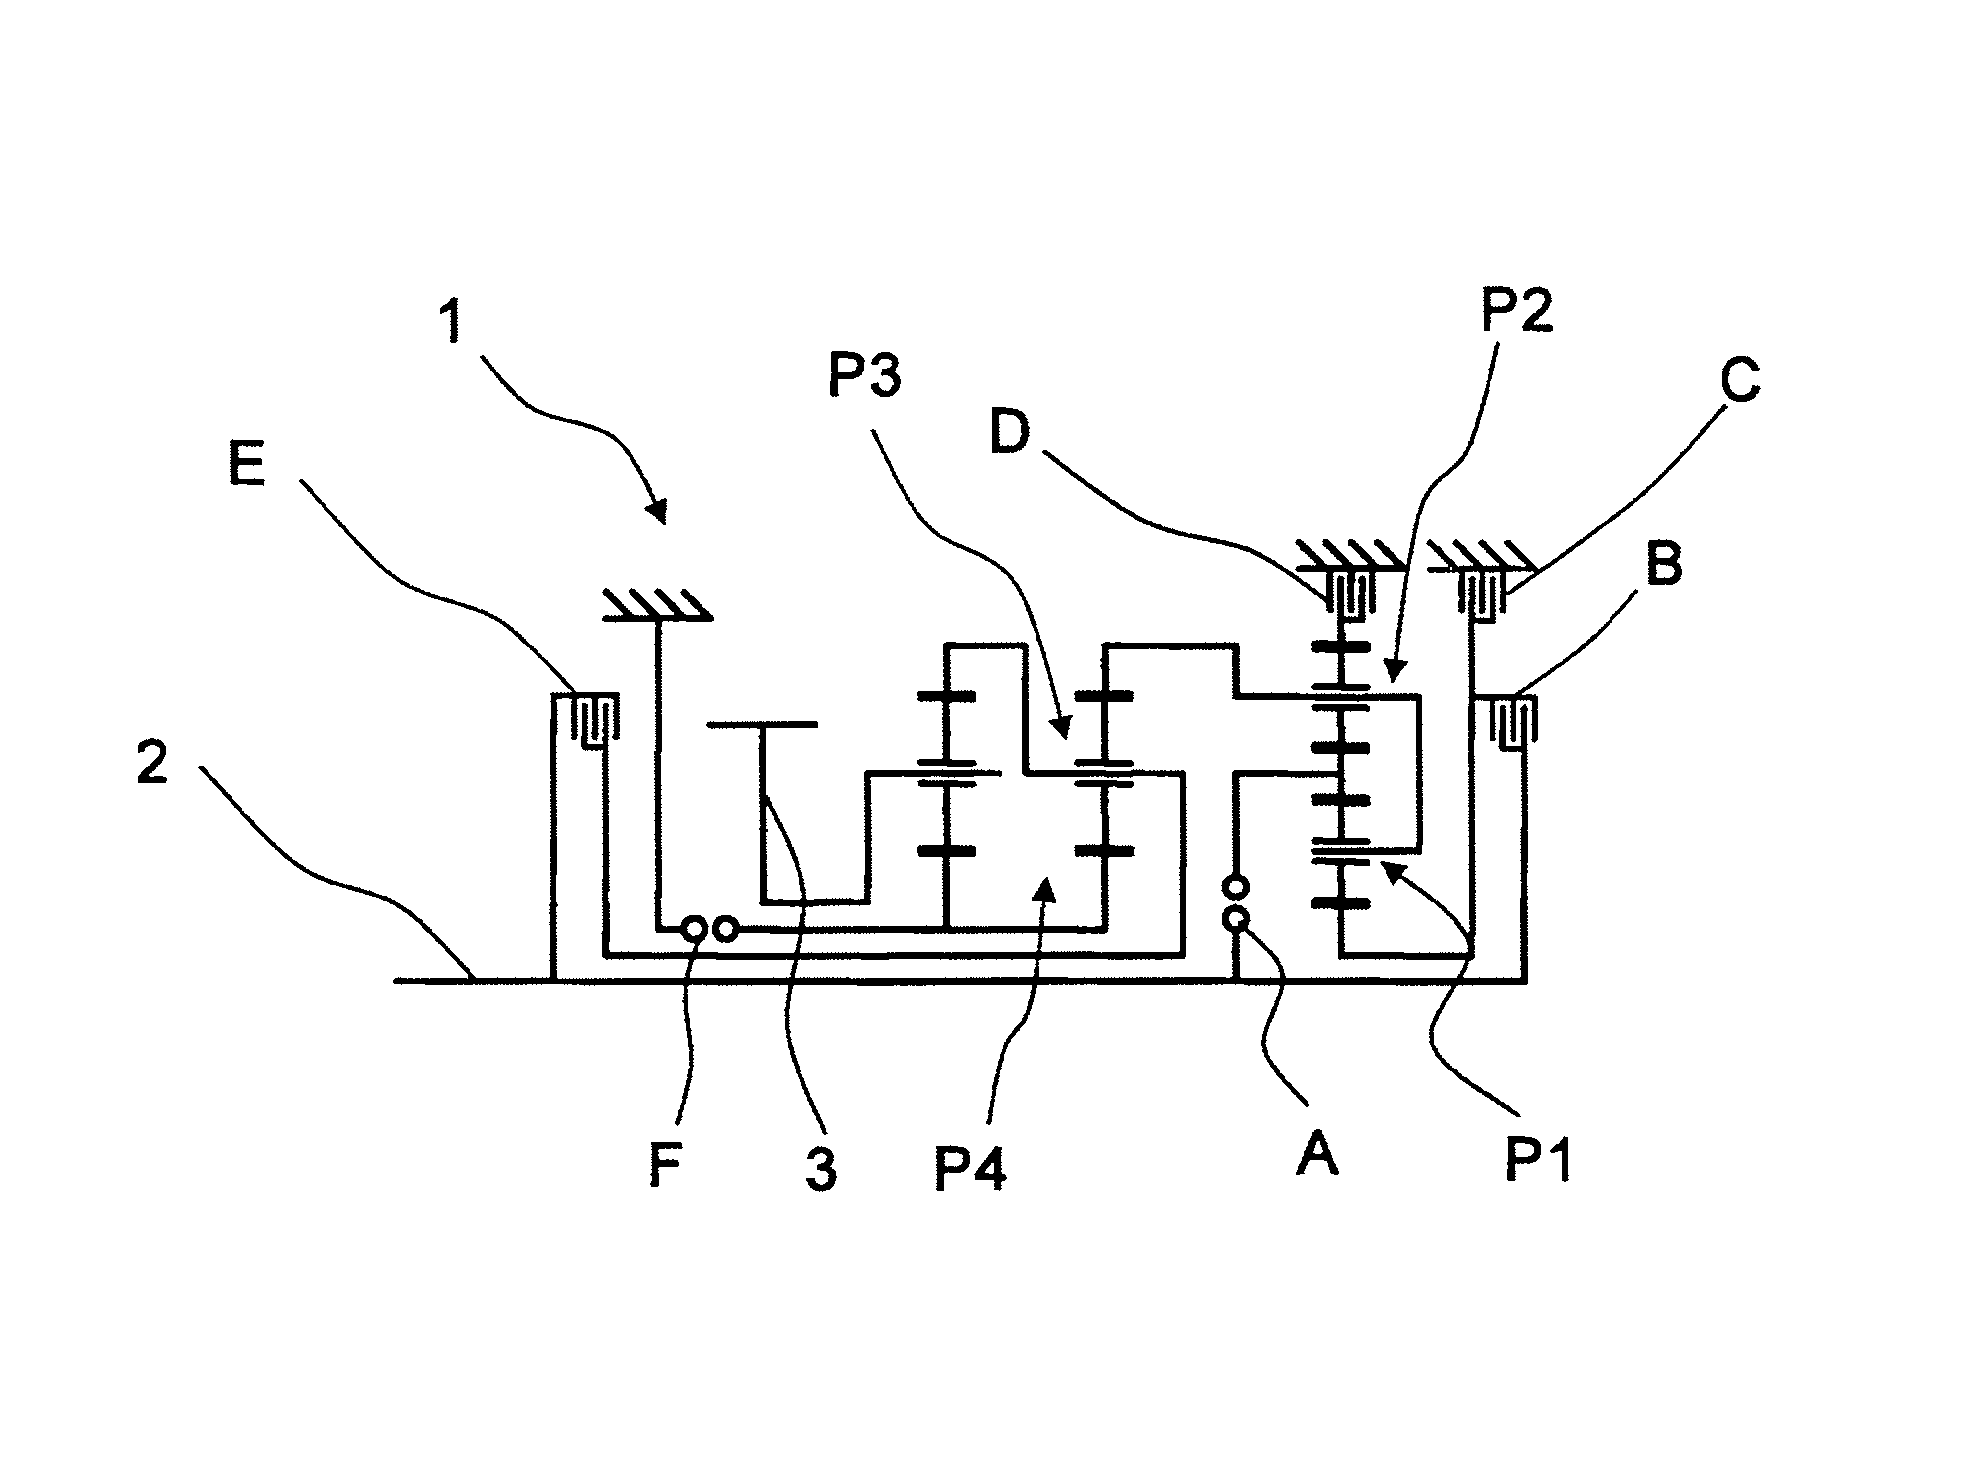 Method for operating a transmission device with a plurality of friction-locking and positive-locking shifting elements